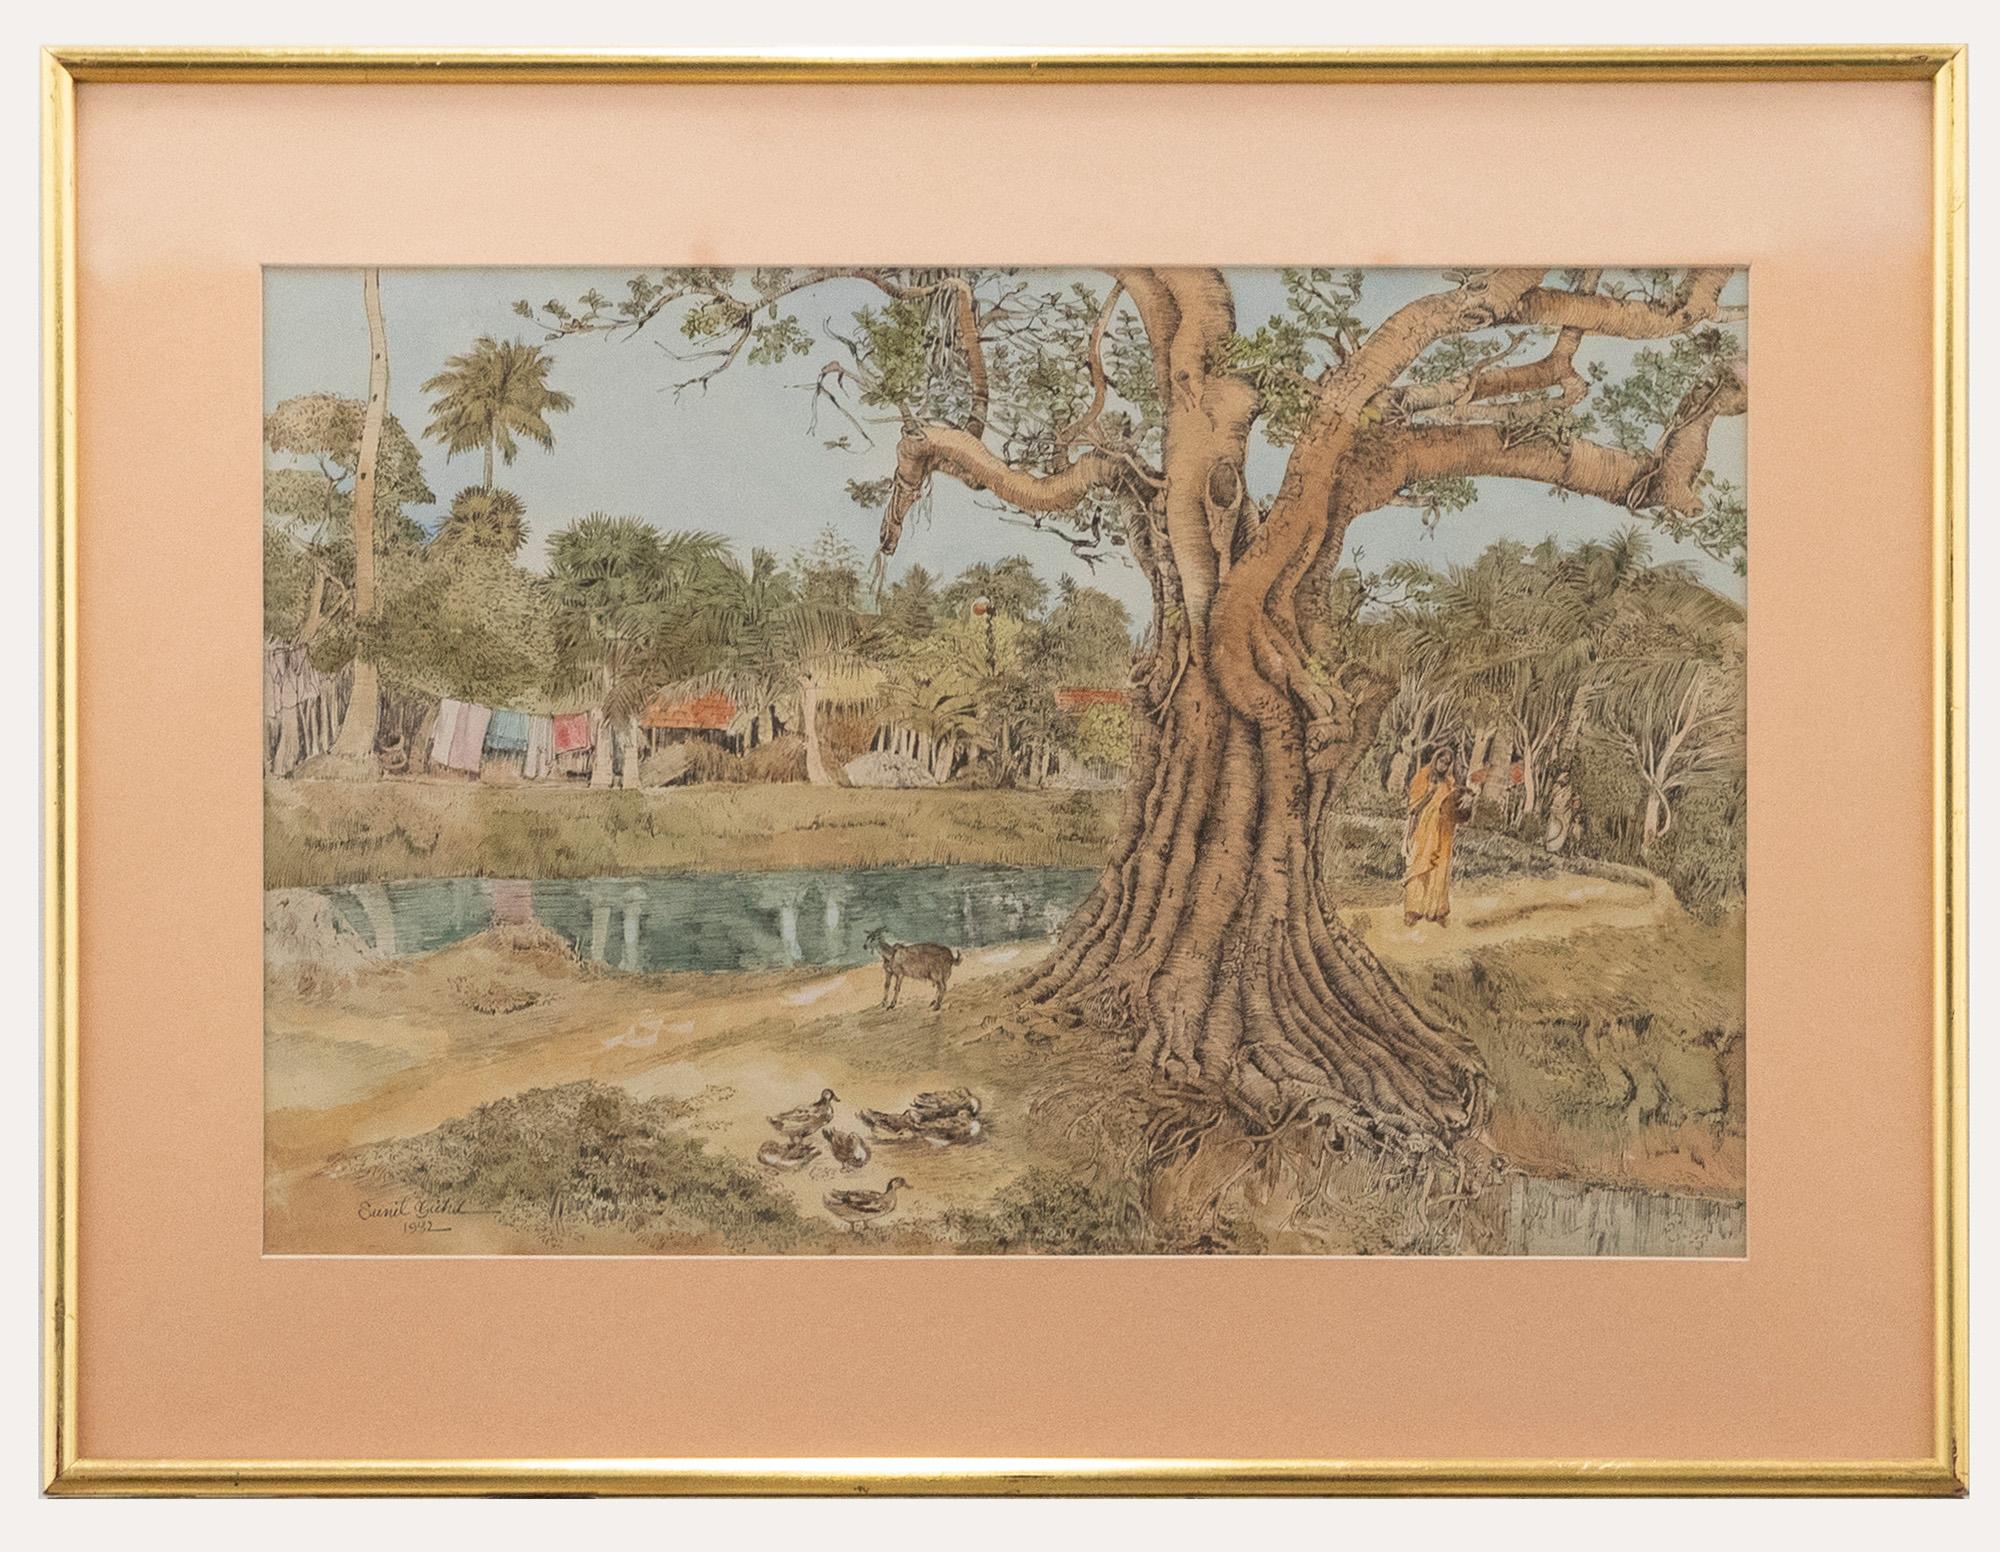 A wonderful pen and ink drawing with watercolour wash by the artist Sunil Guha. Presented in a simple gilt effect frame. Signed and dated. On paper.
